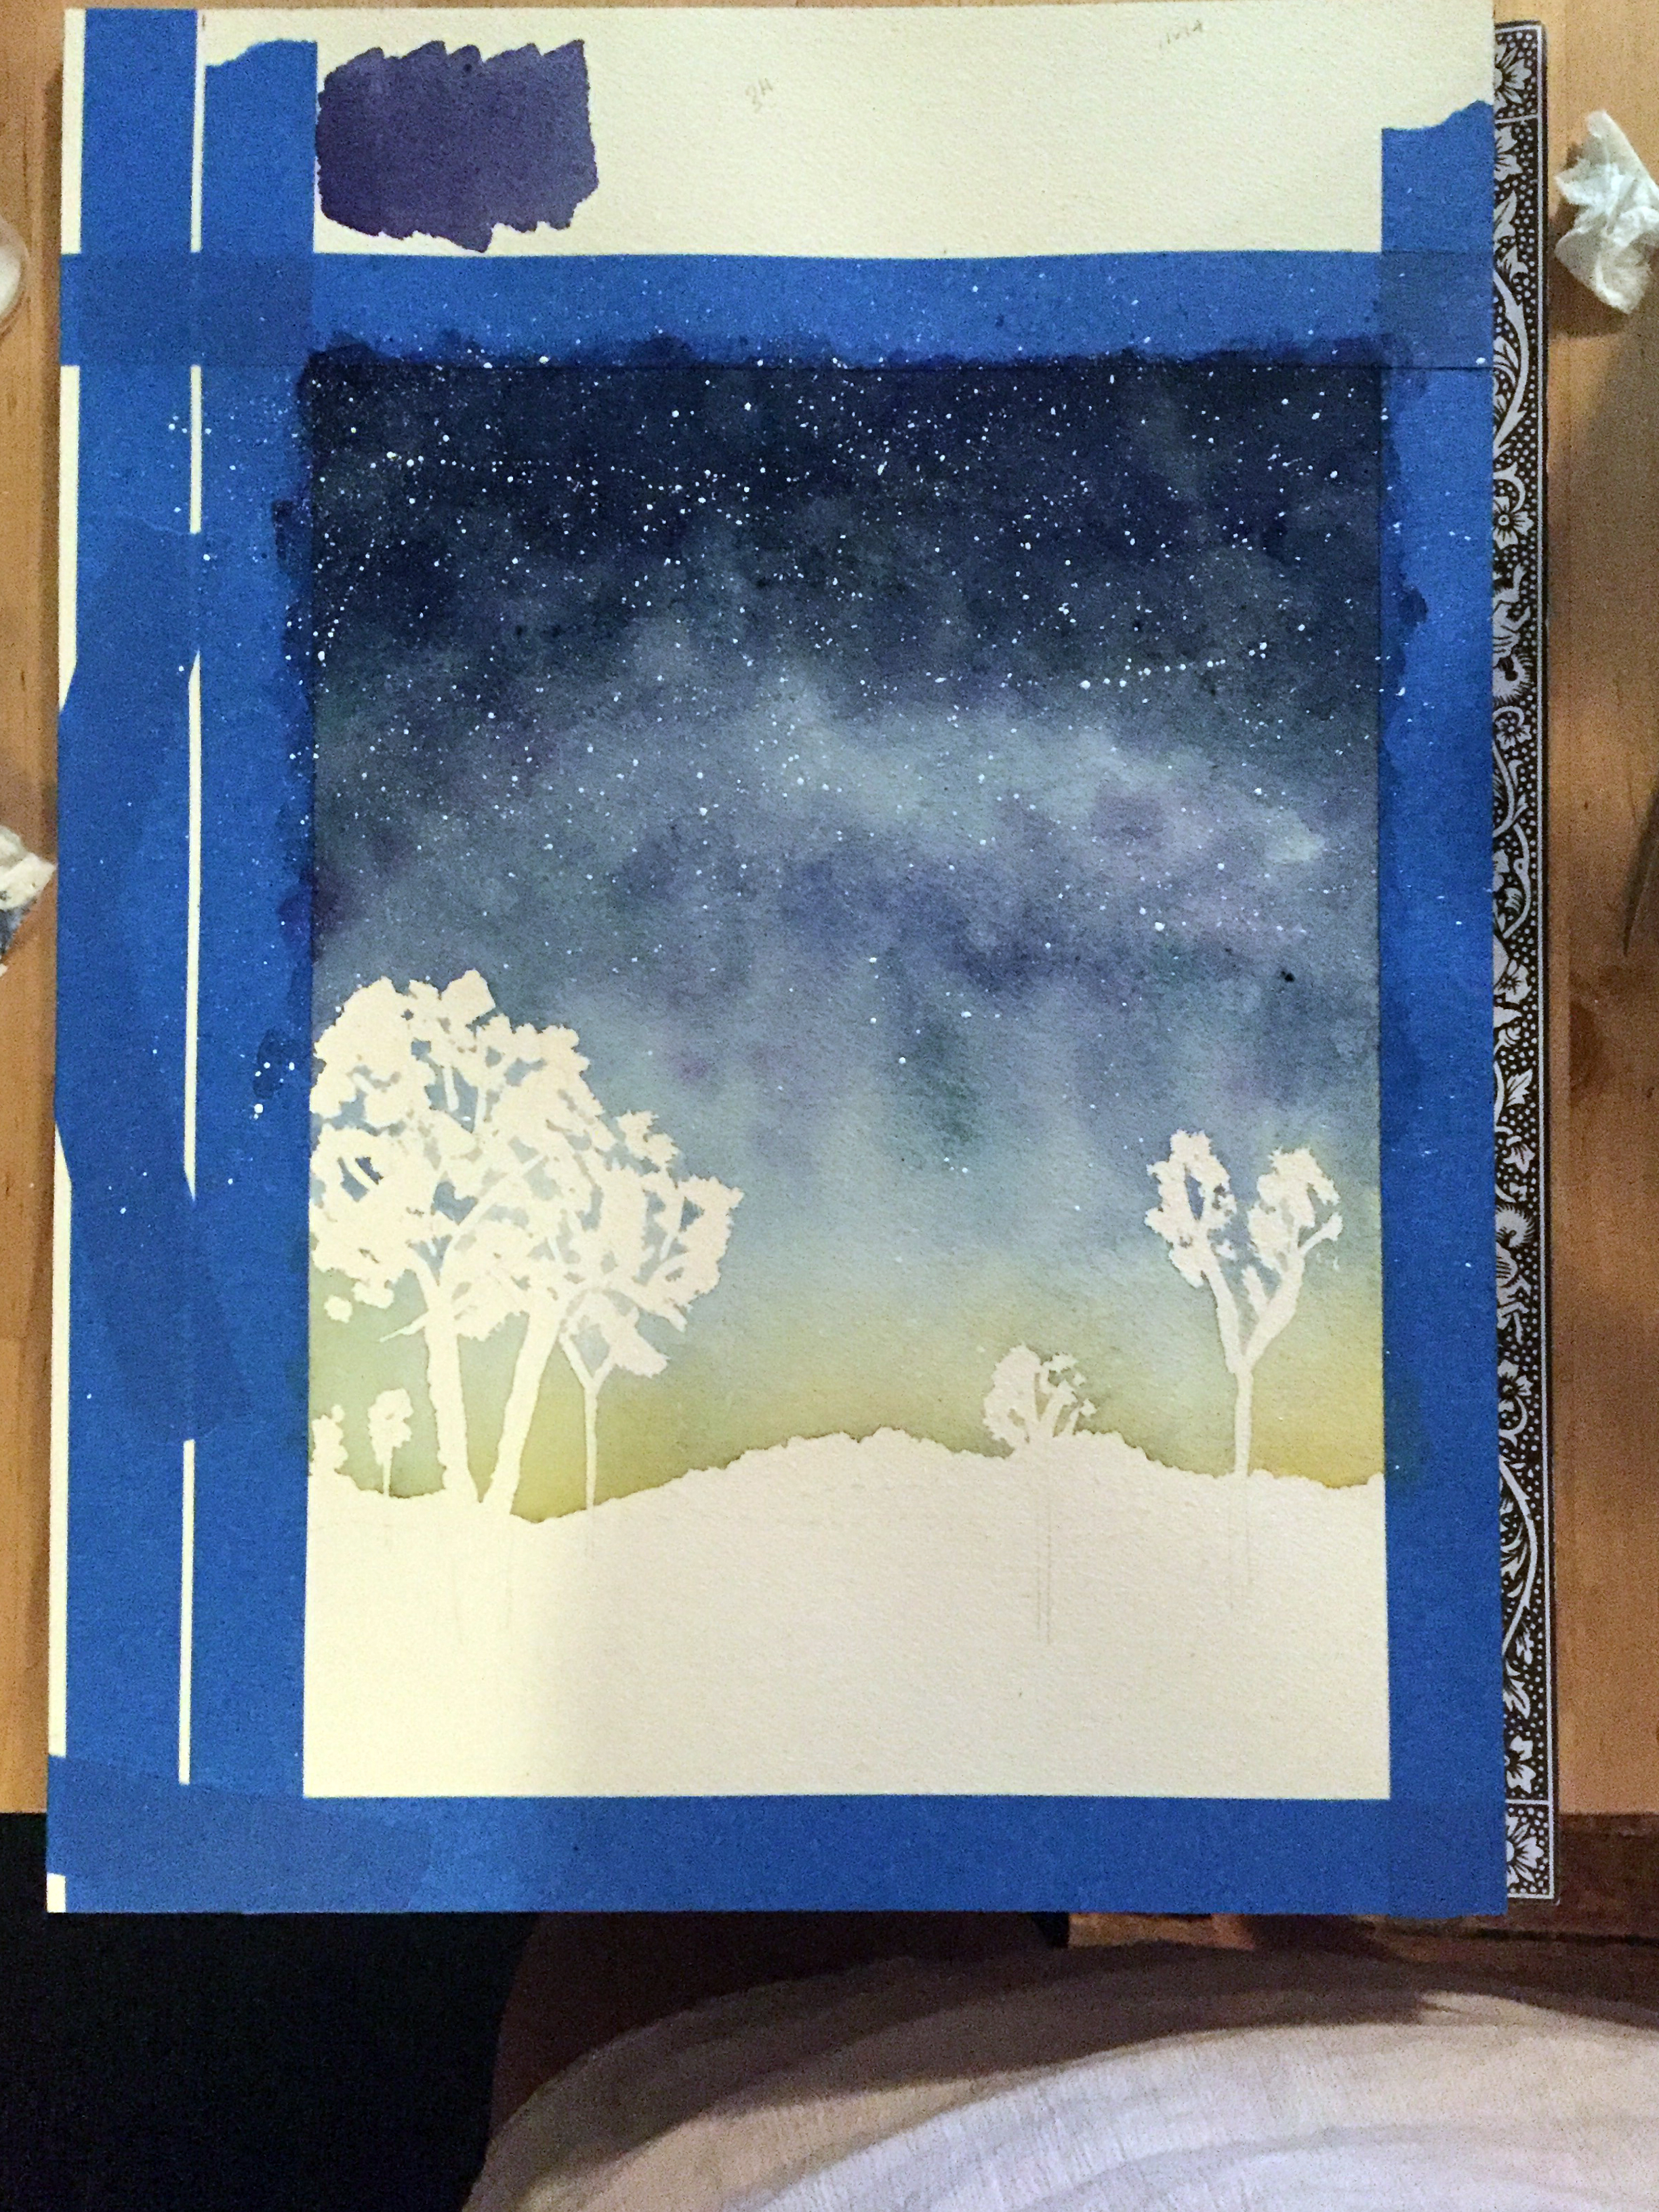  Step 2: Once the sky is complete, gently splatter white paint to represent the stars. Once this is dry, carefully remove the masking fluid.  